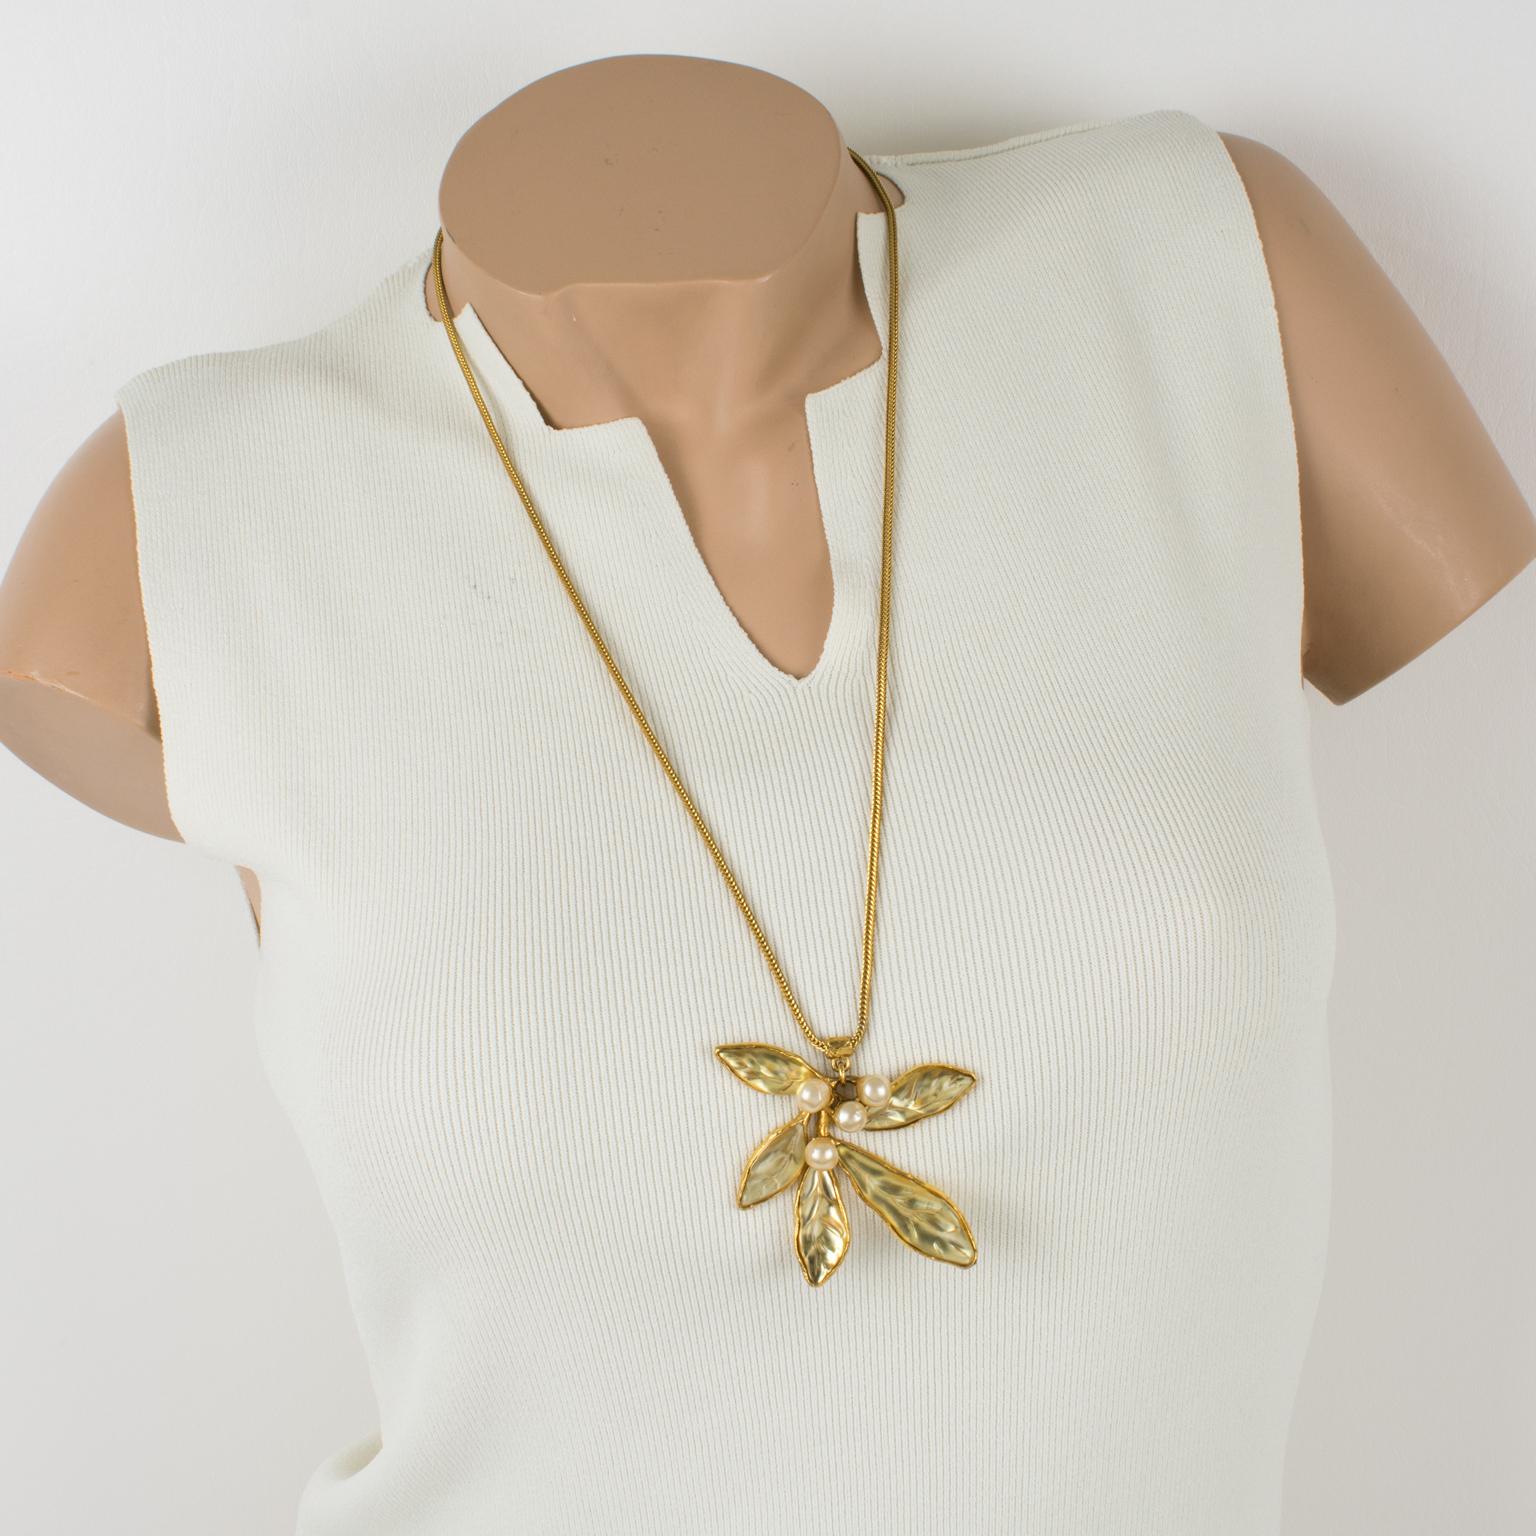 Elegant Kenzo Paris floral long pendant necklace. Gilt metal all carved and textured pendant featuring mistletoe flowers and leaves. Leaves are yellow champagne carved resin and flowers are pearl-like beads. Long serpentine gilt metal chain with